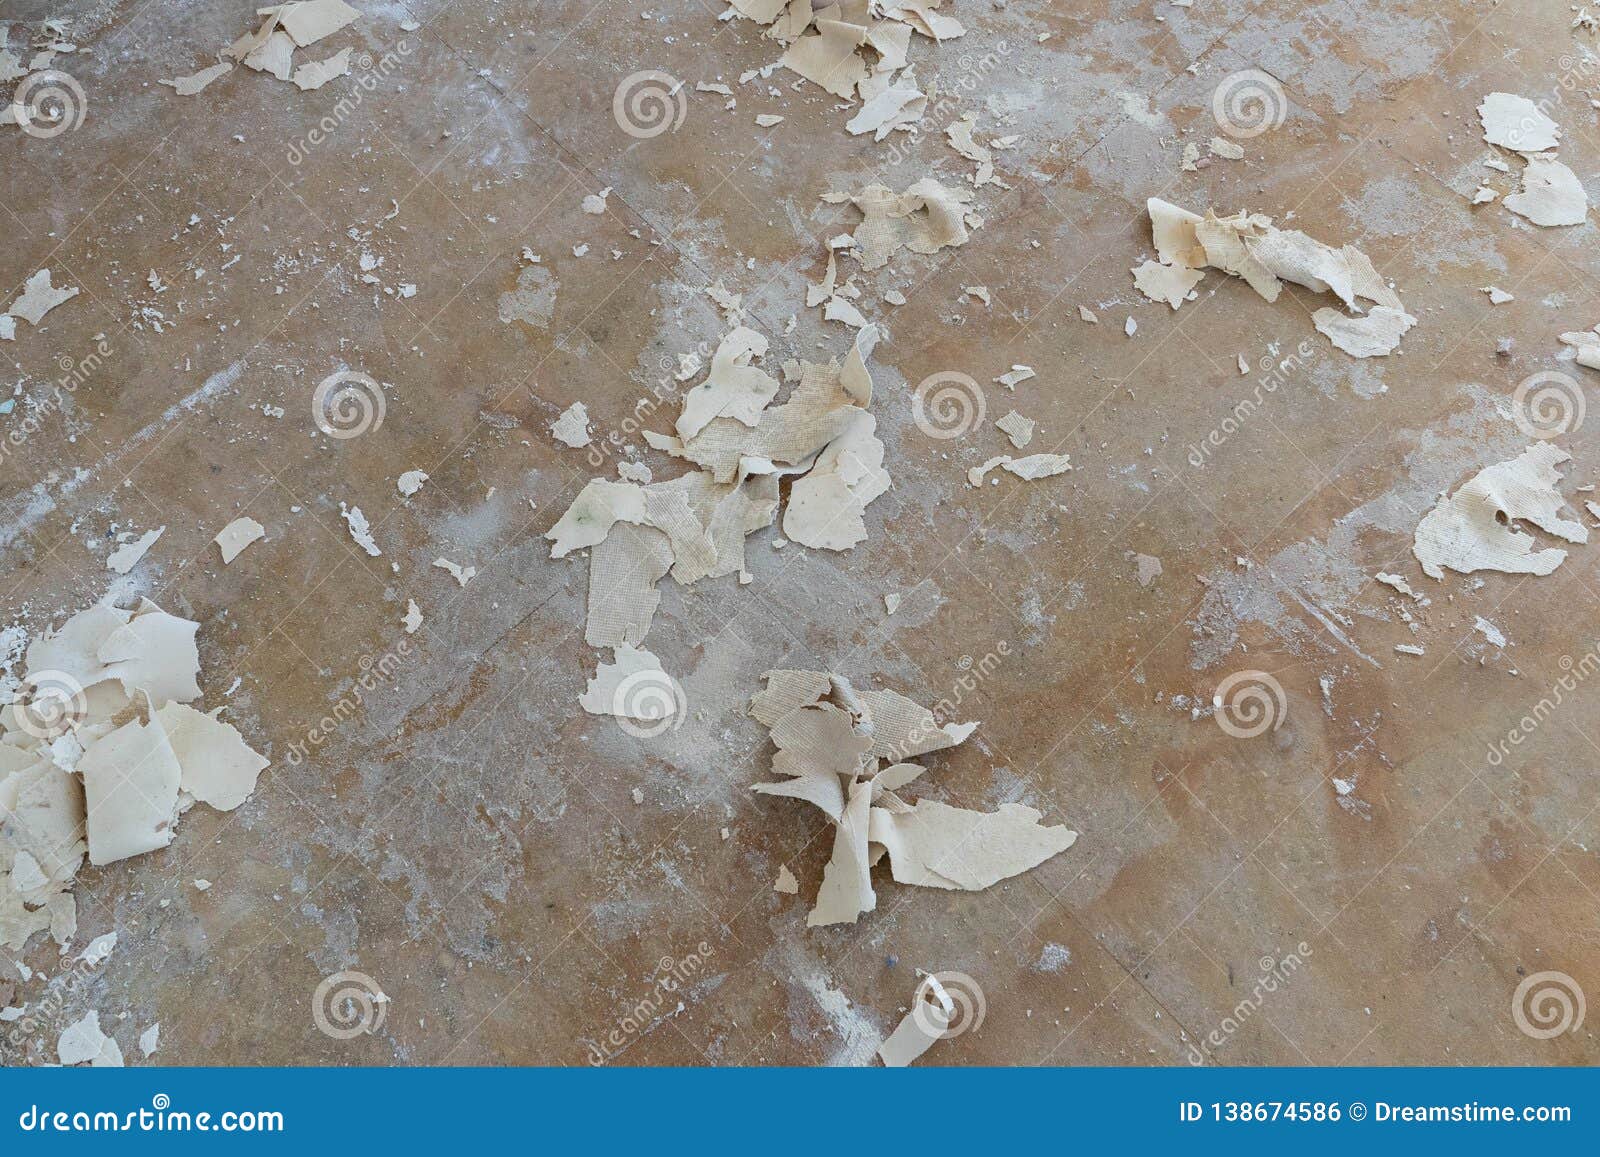 Remove The Old Carpet Residue From The Floor Stock Photo Image